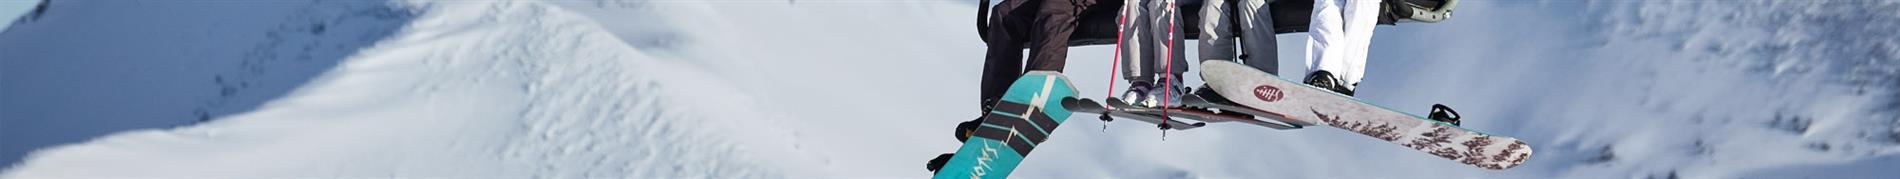 Outdoor Tech Women's skis, snowboards, and accessories for everything snow. 